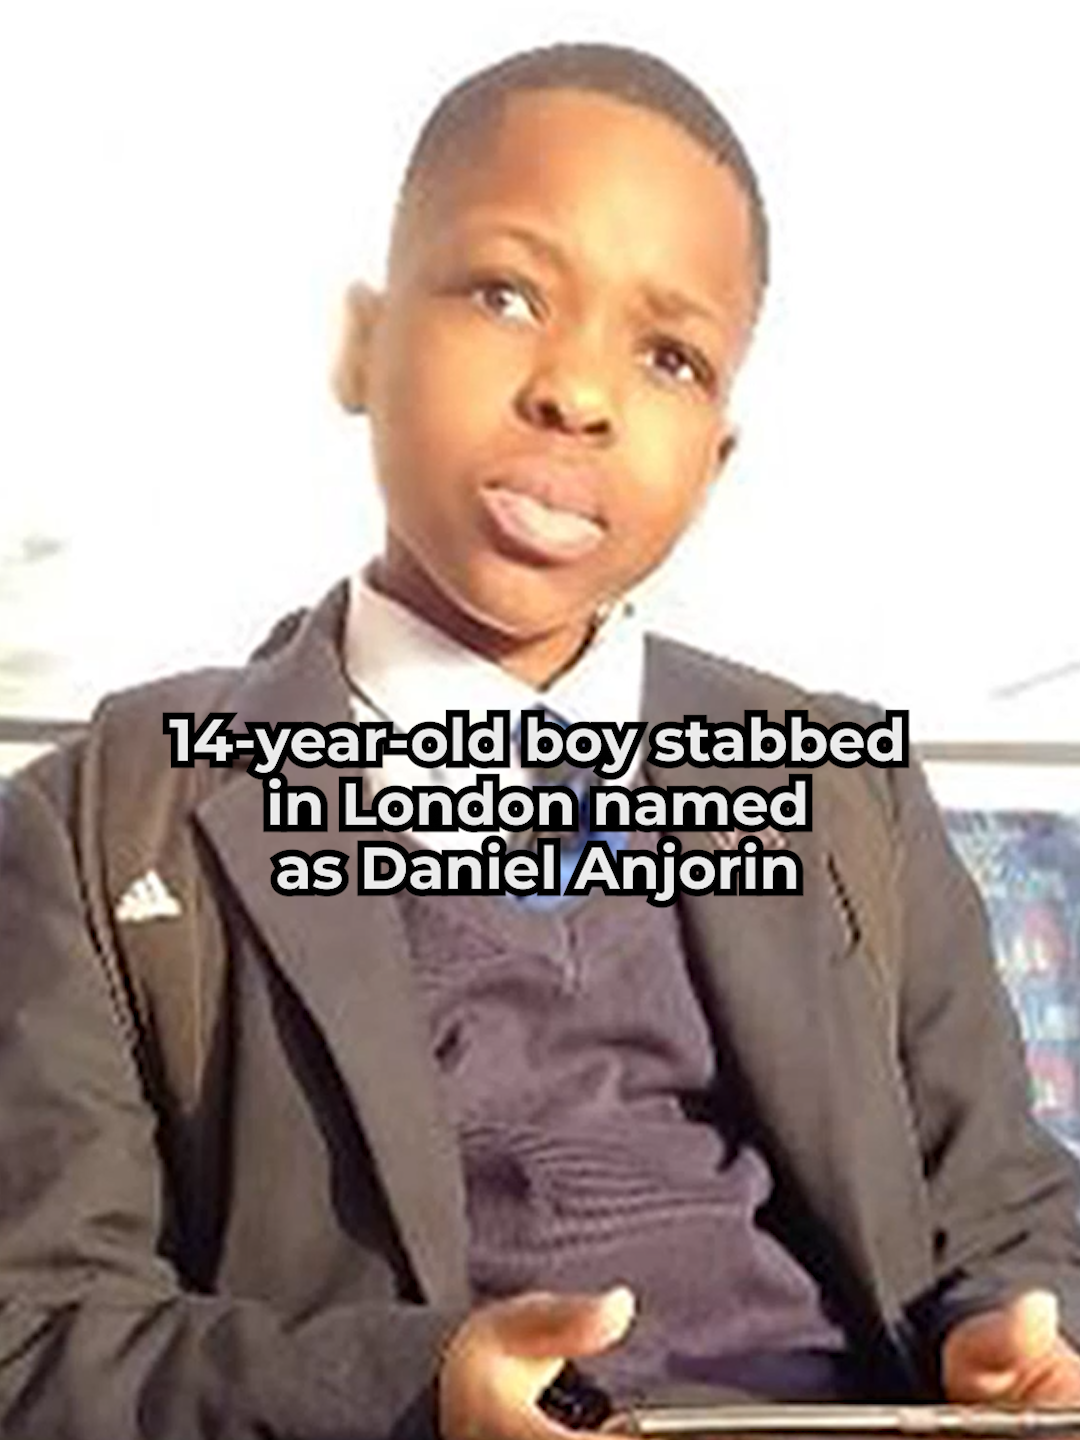 BREAKING: The 14-year-old boy killed in a sword attack in Hainault has been named as Daniel Anjorin. A 36-year-old man remains in custody after being arrested on suspicion of murder. #London #Breaking #BreakingNews #Crime #uknews #GBNews